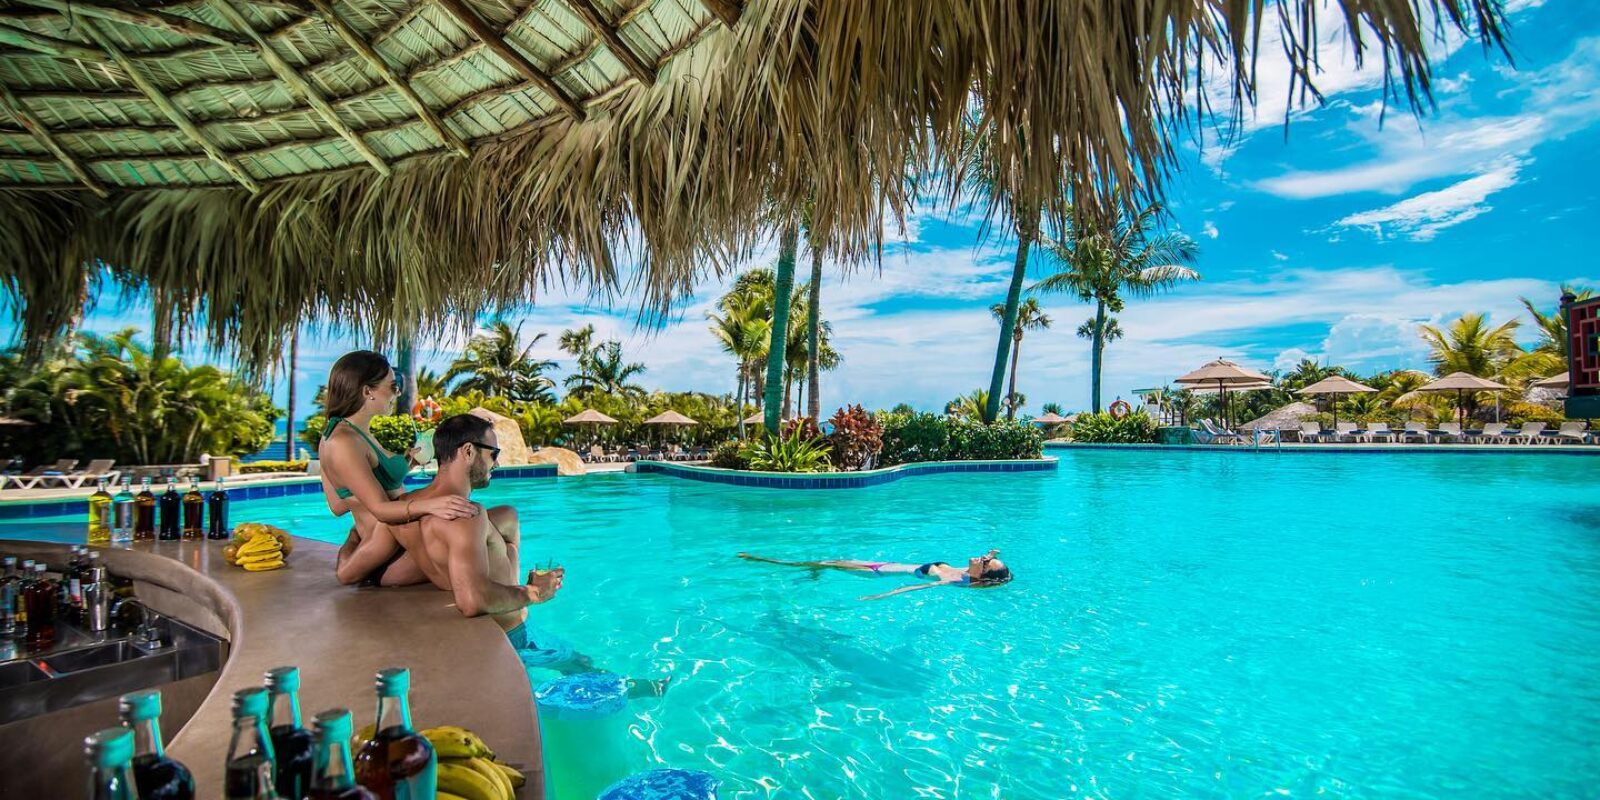 Enjoy a drink without leaving our luxury pool. Your Dominican Republic vacation awaits.